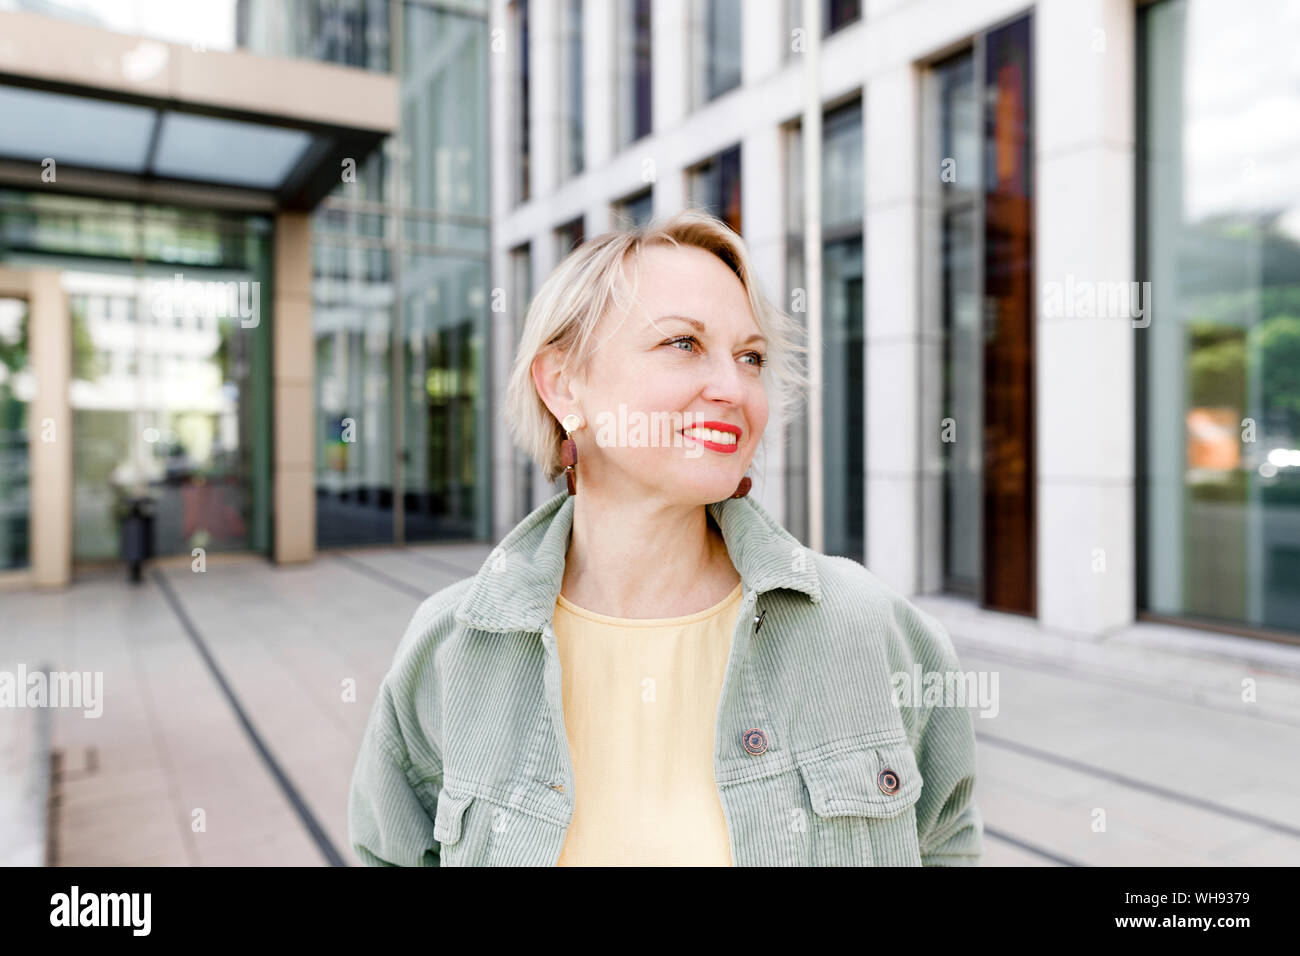 Smiling woman in the city standing outside Stock Photo